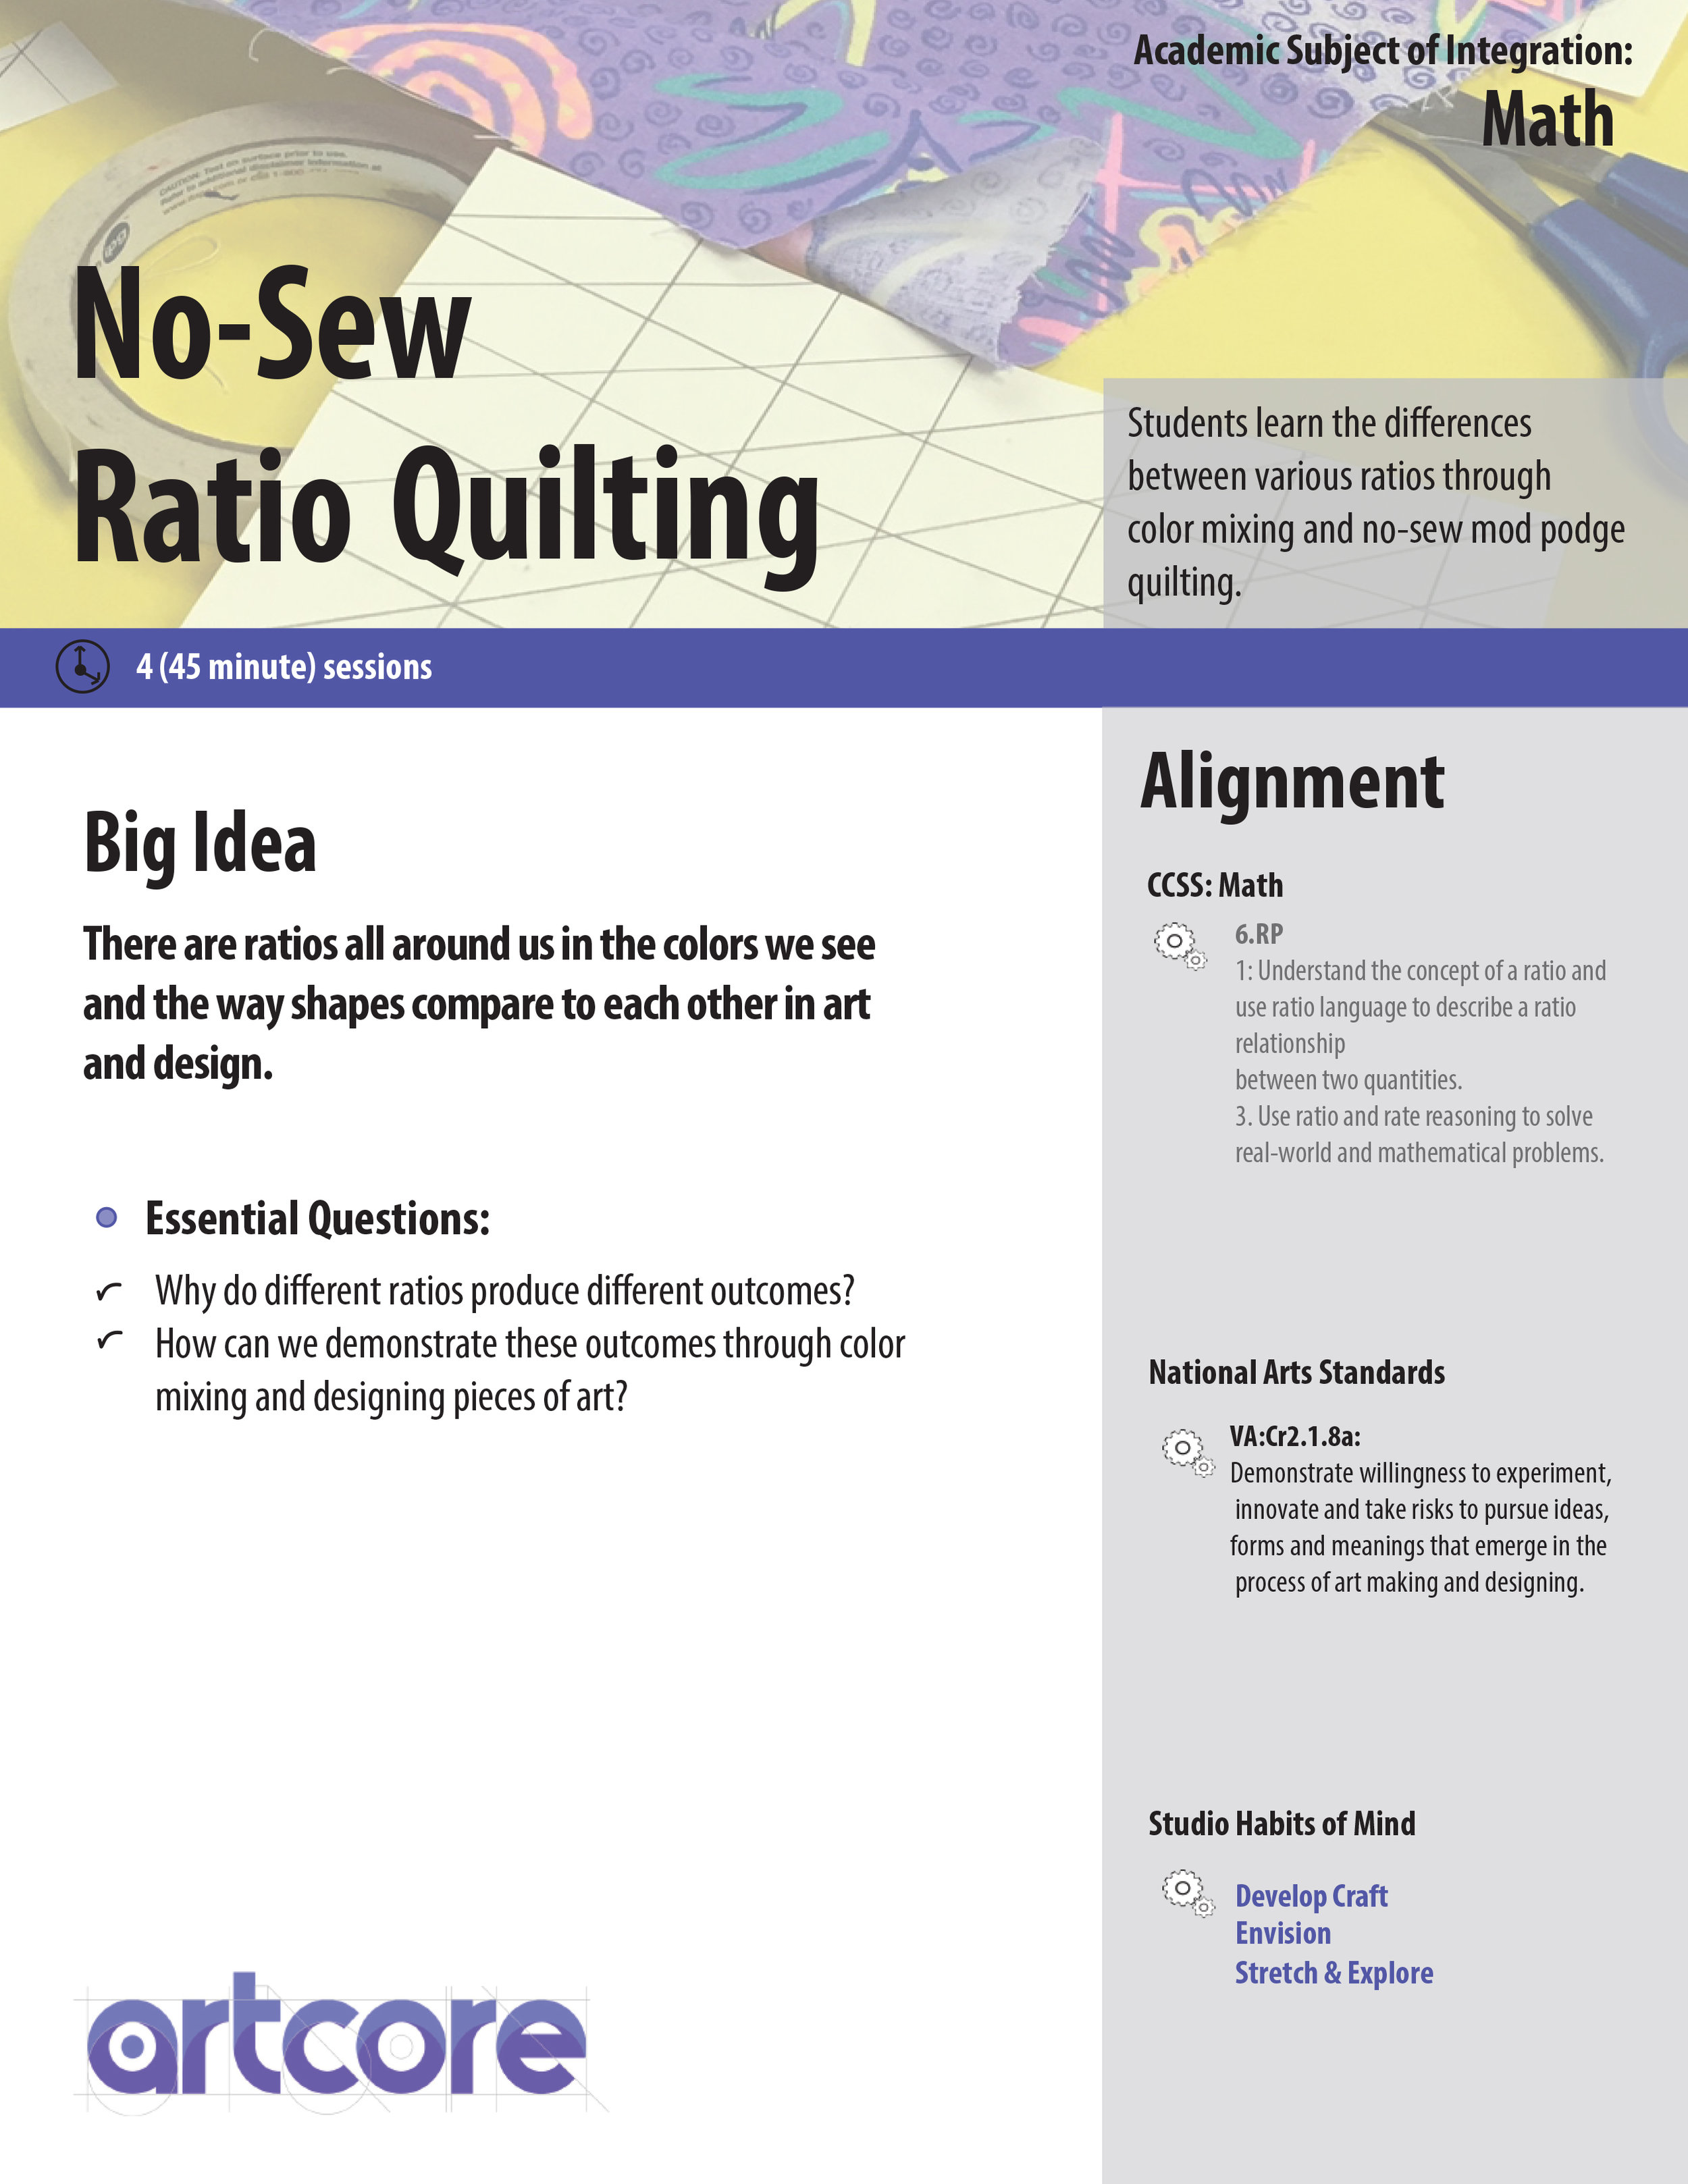 No-Sew Ratio Quilting_Action Plan.jpg